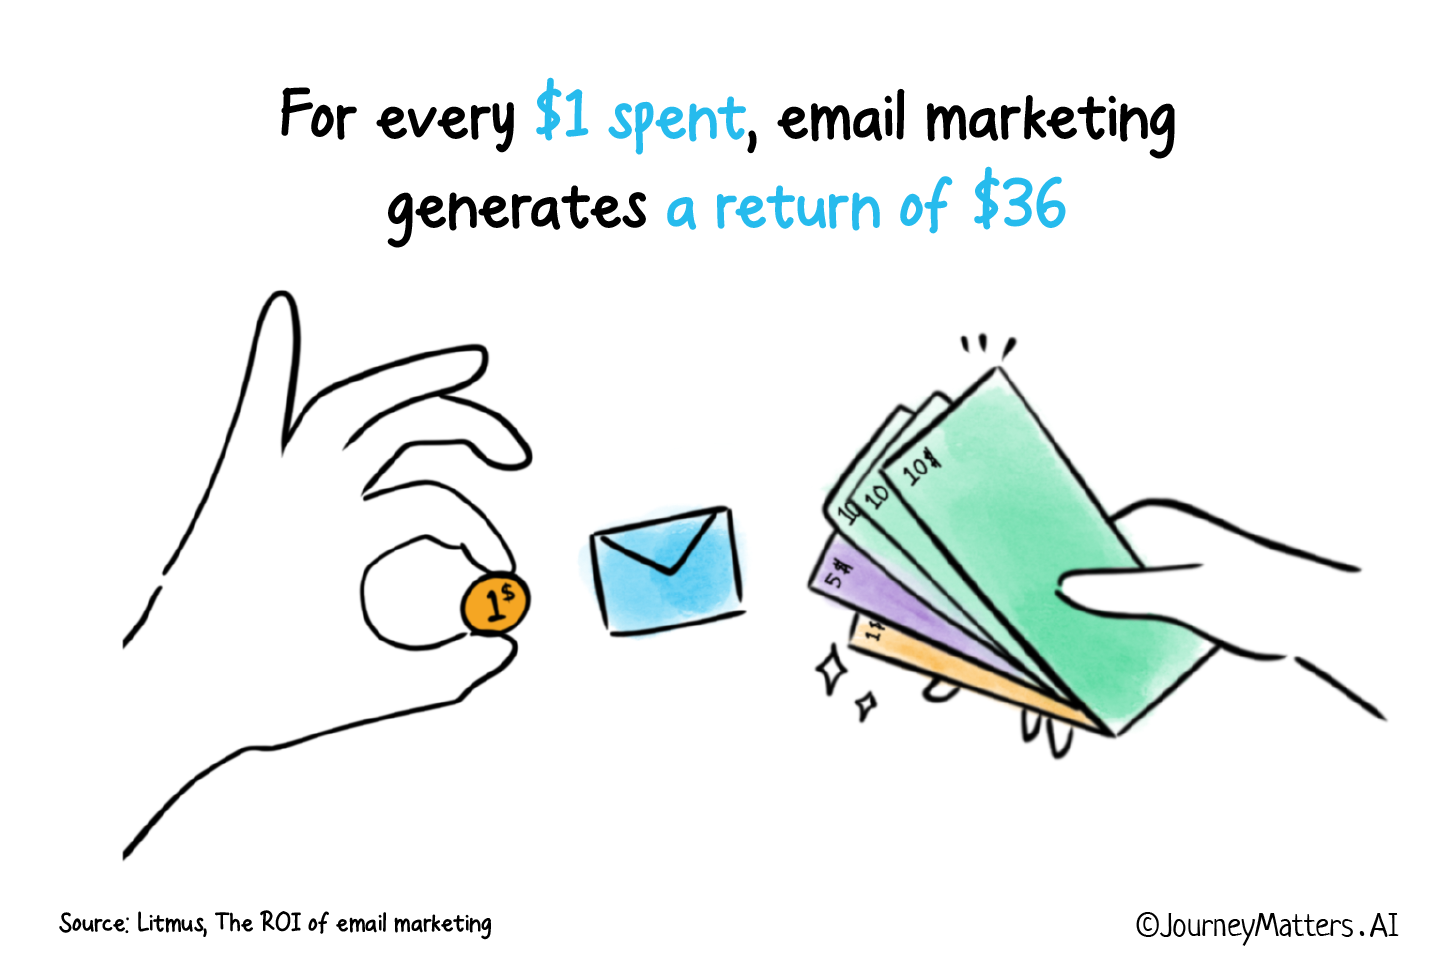 ROI of email marketing: for every $1 spent, email marketing generates a return of $36